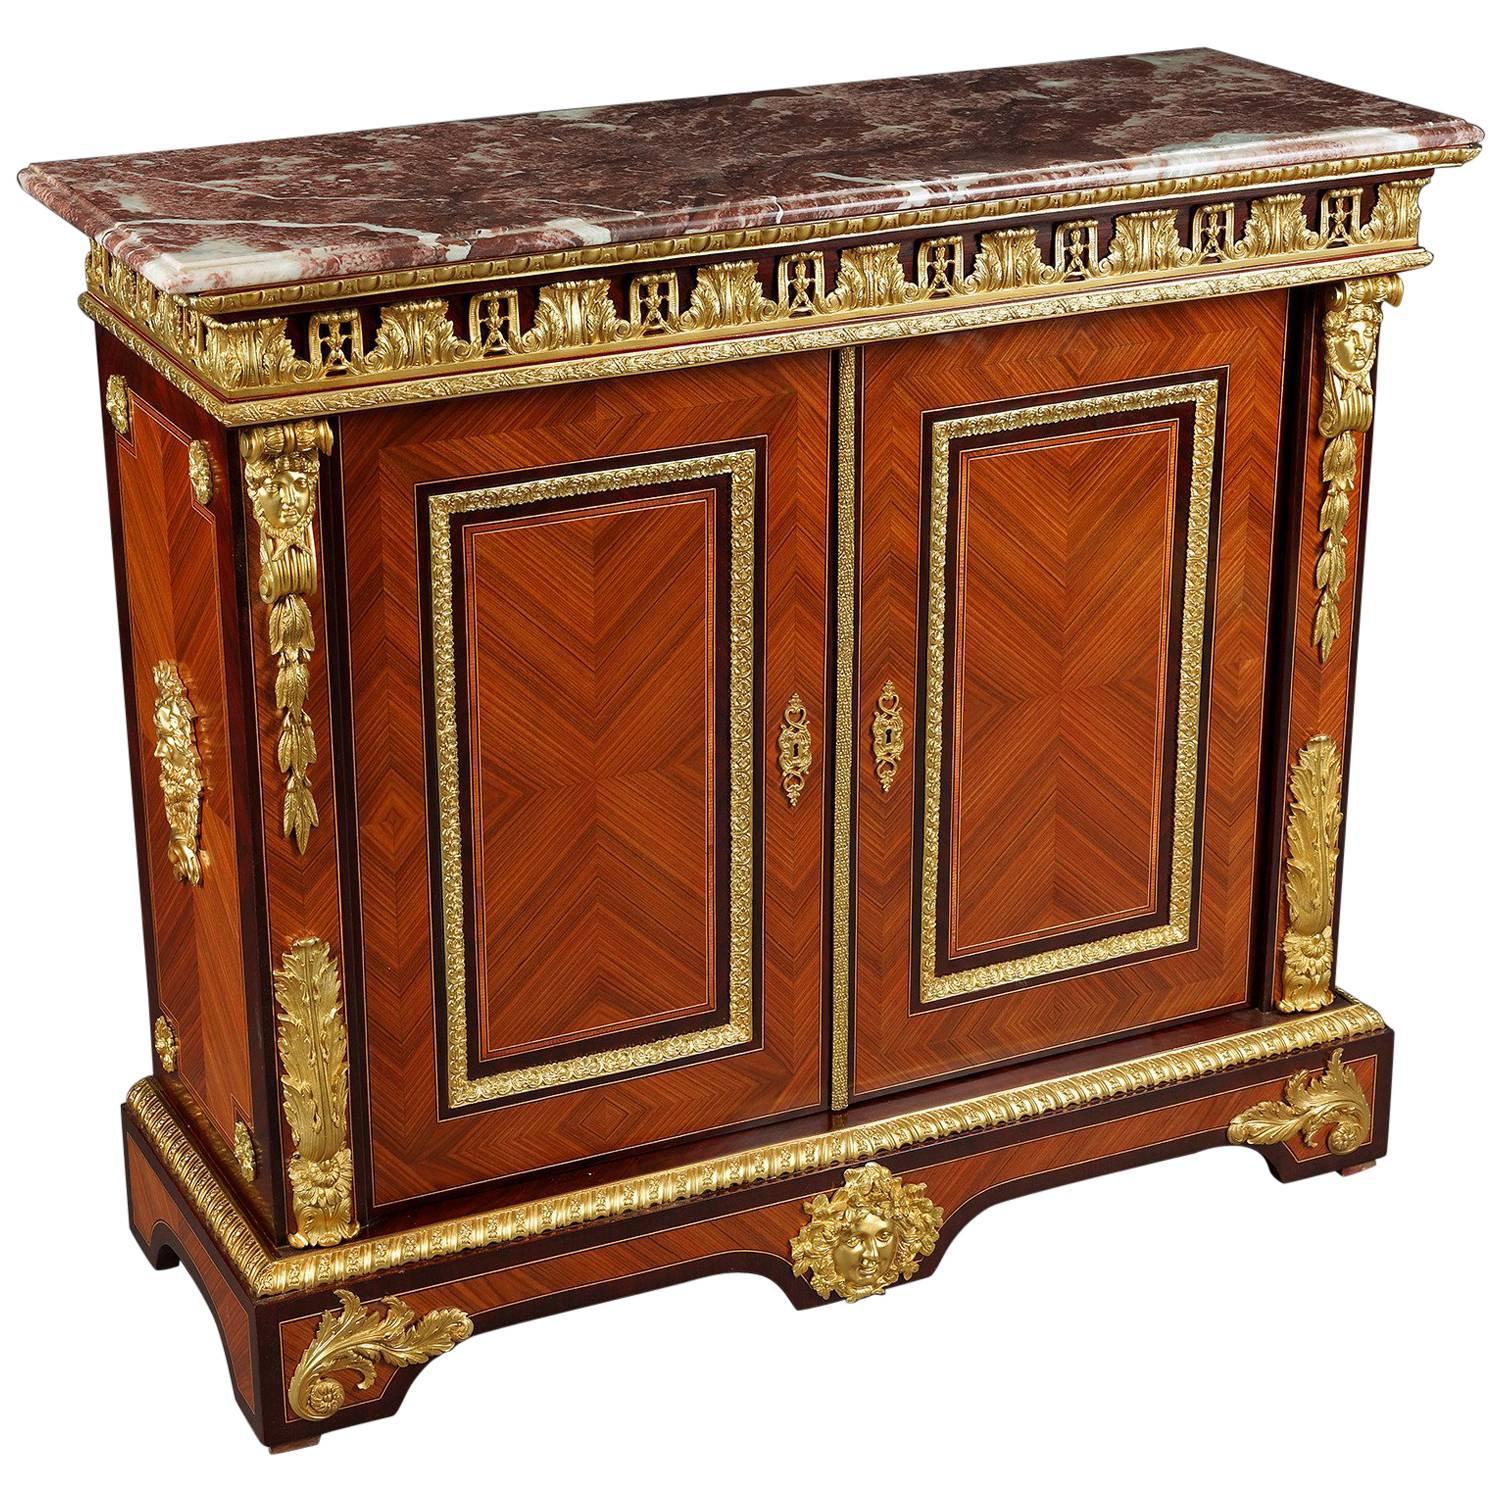 20th Century French Meuble D'appui Commode in Louis Quatorze Style